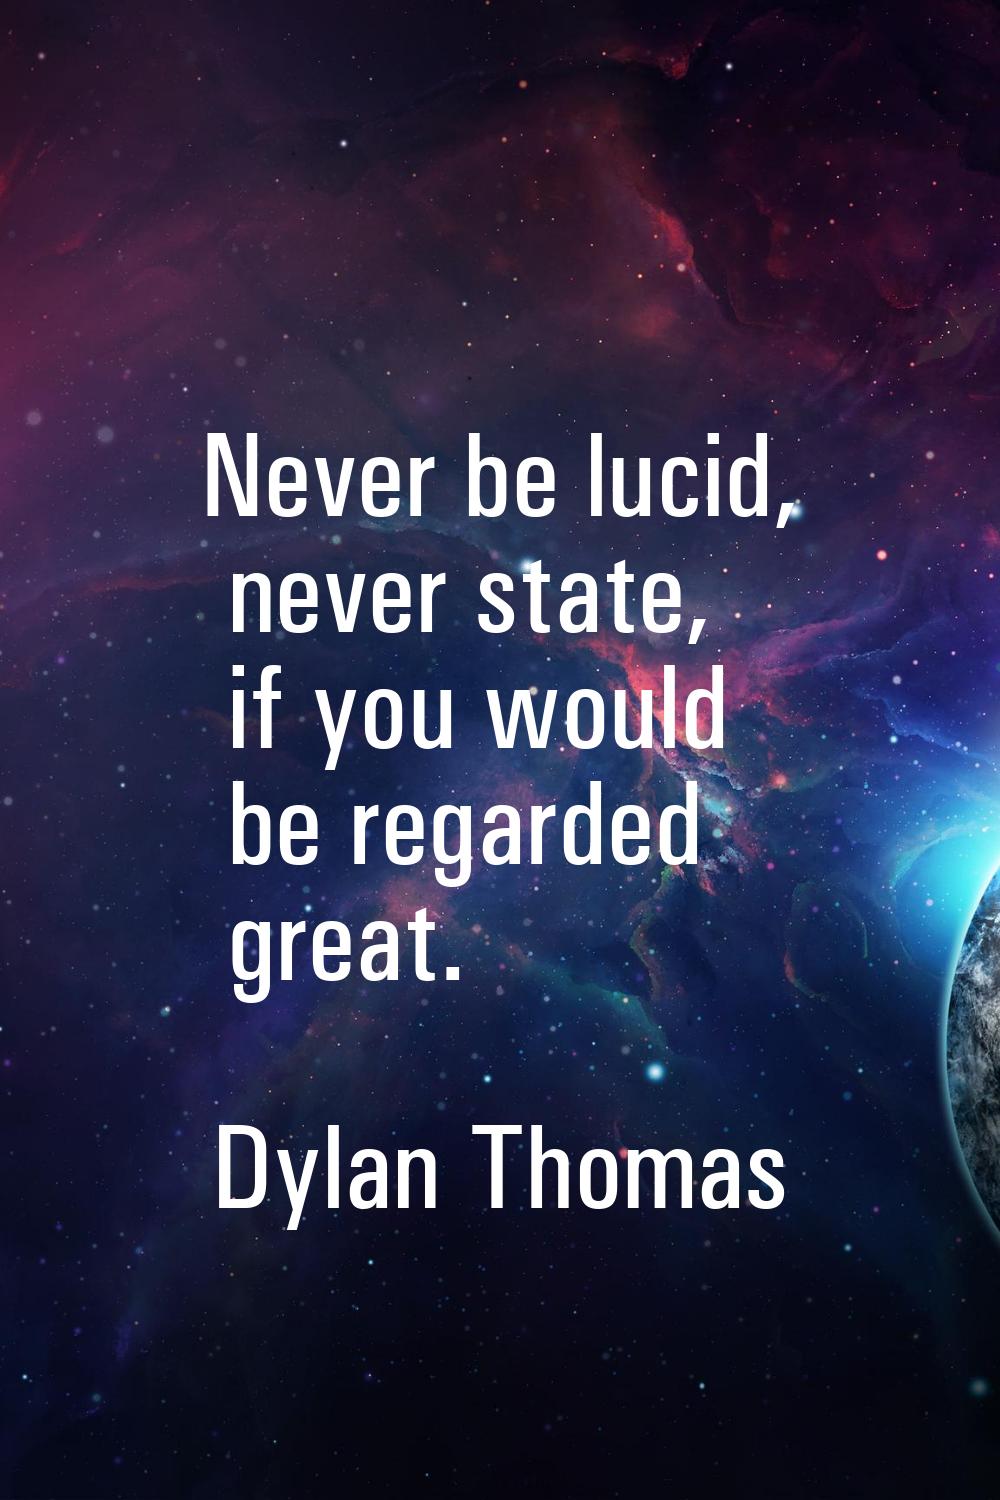 Never be lucid, never state, if you would be regarded great.